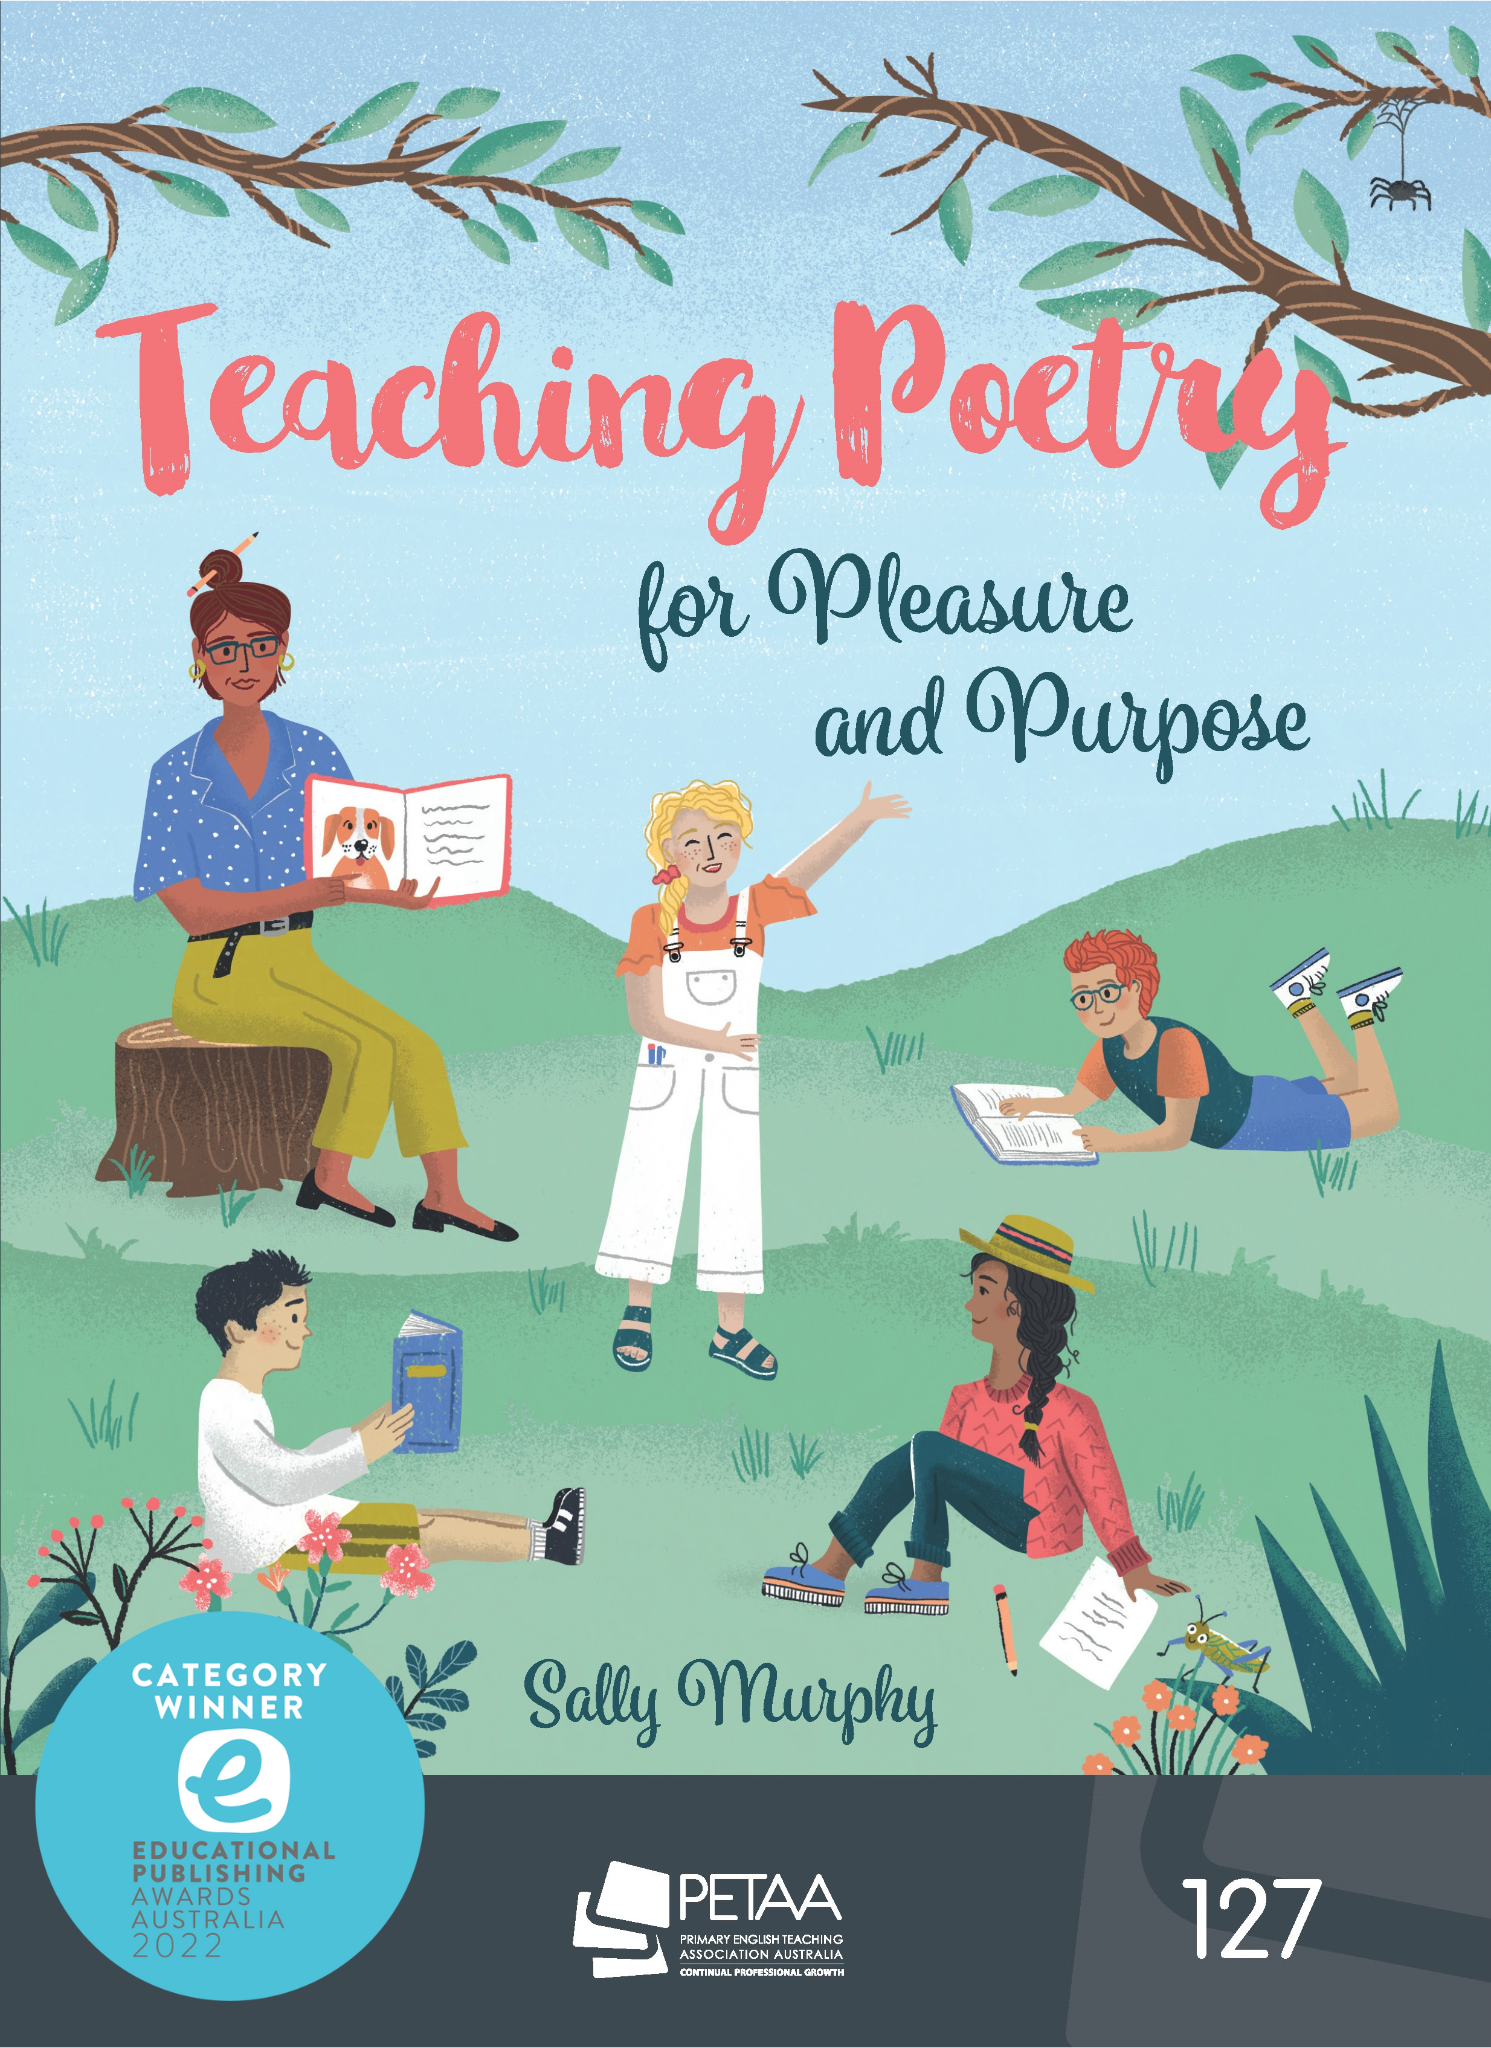 Teaching poetry for pleasure and purpose